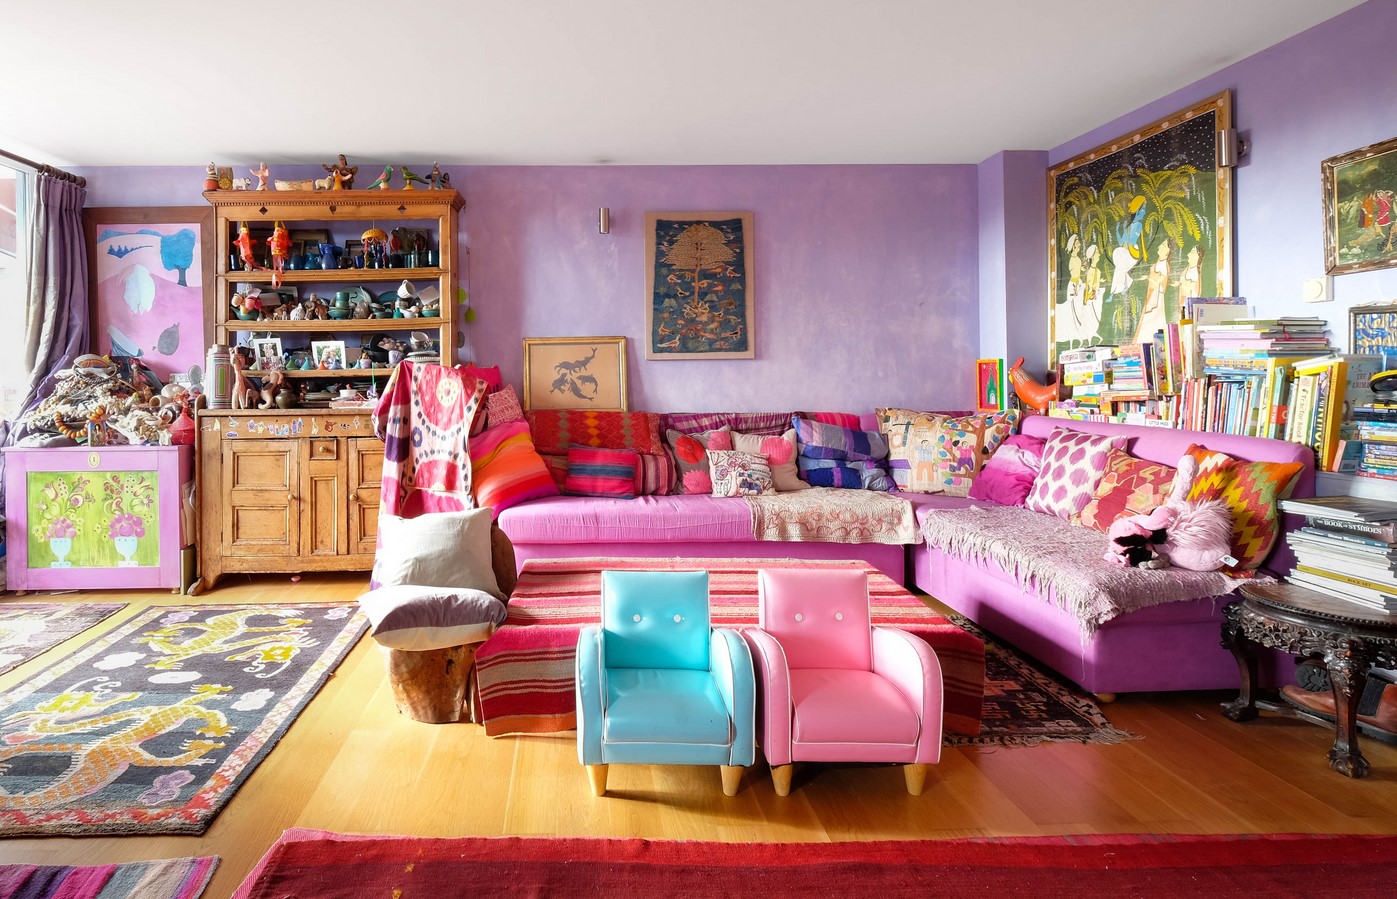 mix-purple-and-orange-in-home-décor